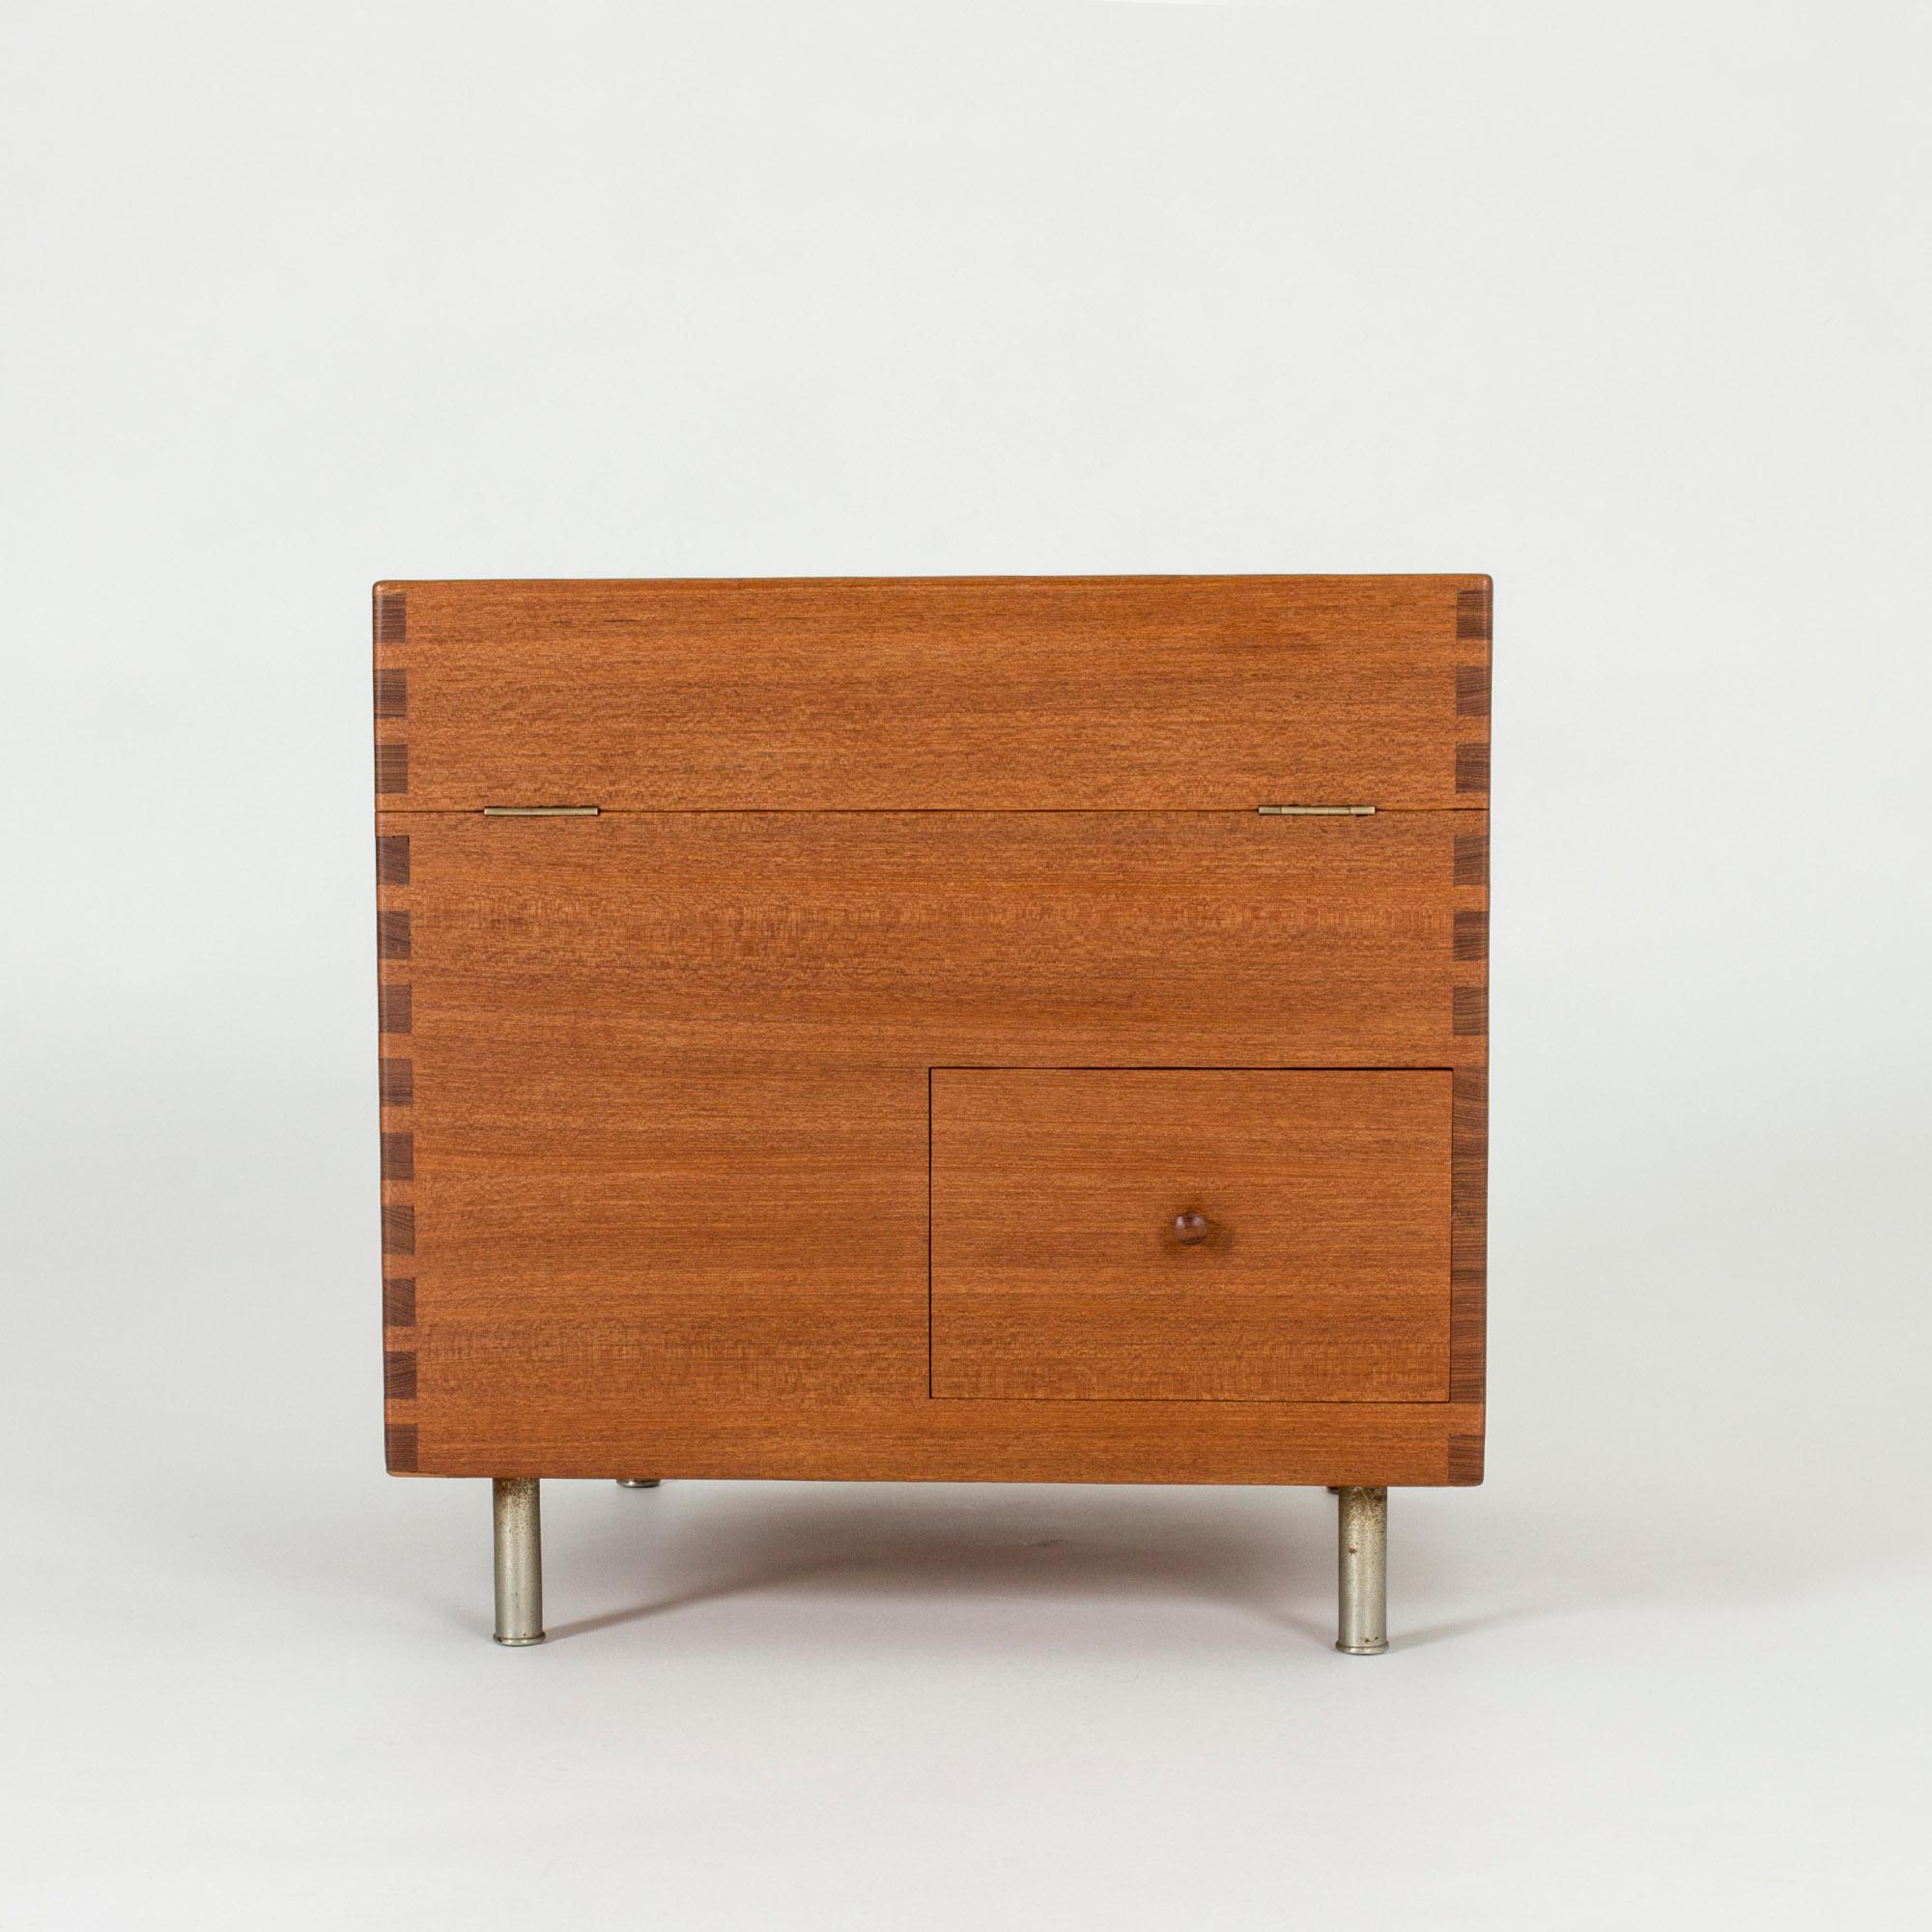 Rare cubical bar cabinet, model “8034”, designed by Hans J. Wegner in 1956. Made in teak with a decorative pattern created at the joinery of the sides. Has one drawer and two compartments inside. Steel legs.